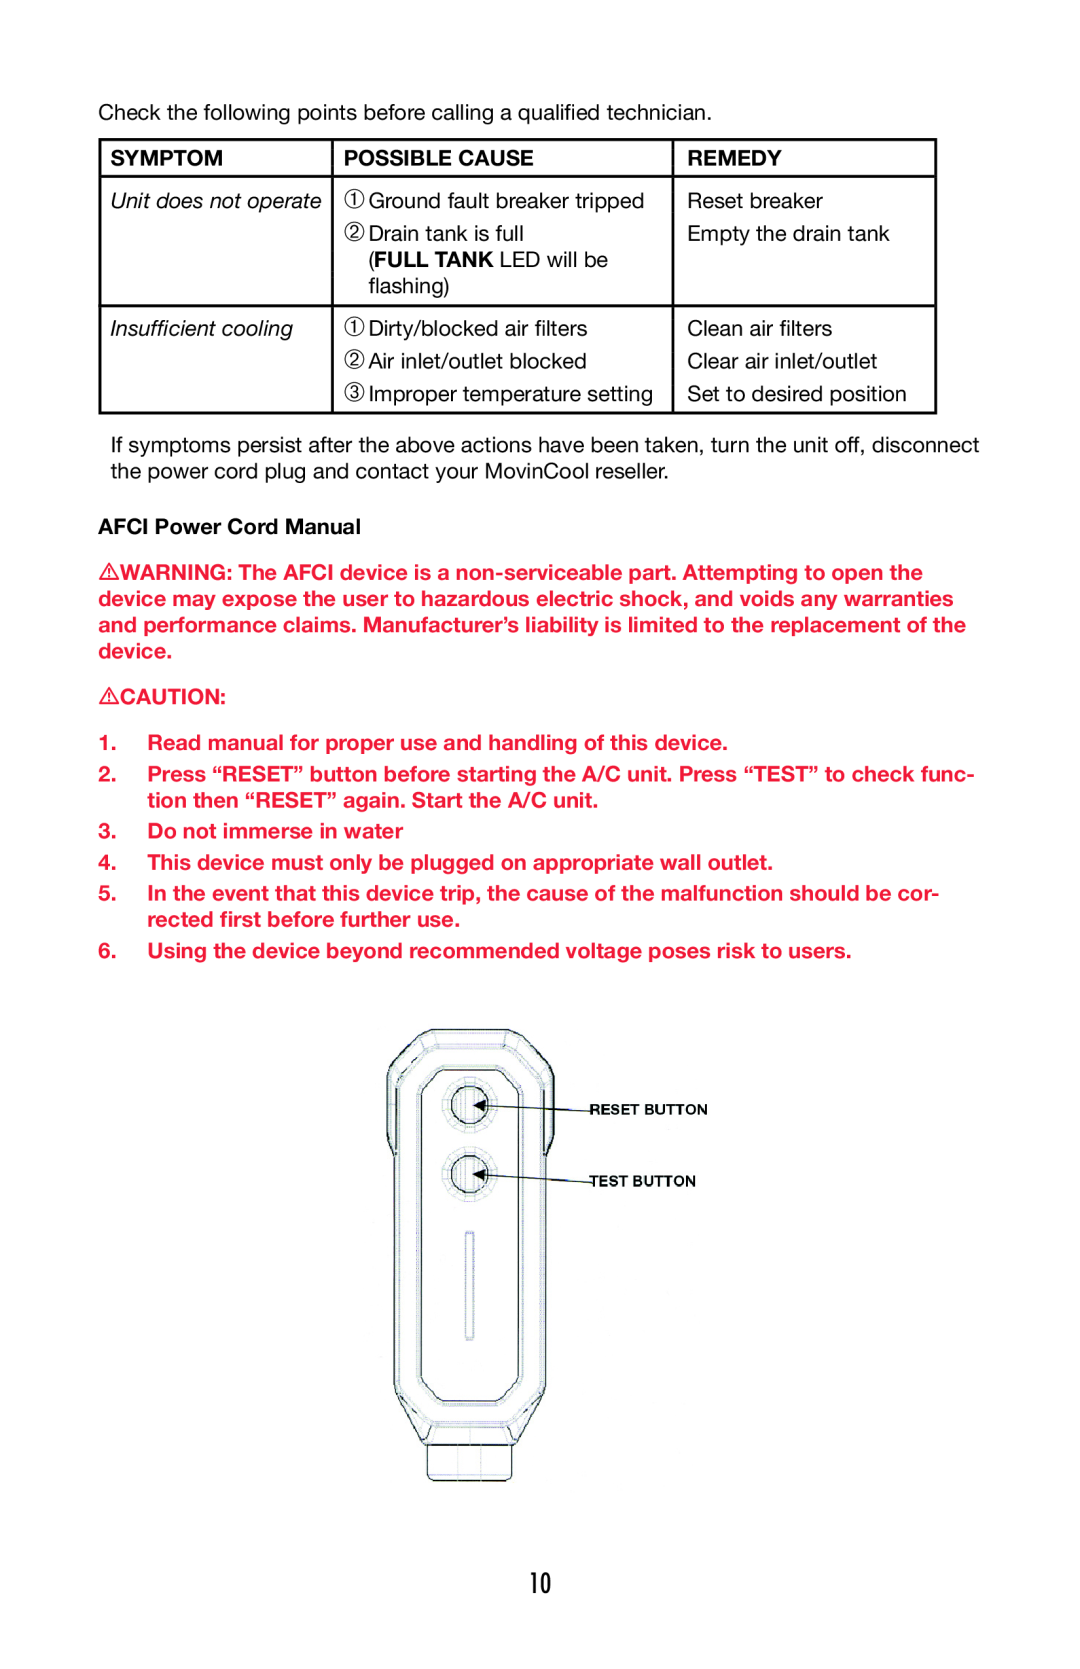 Denso OFFICE PRO 36 operation manual AFCI Power Cord Manual 